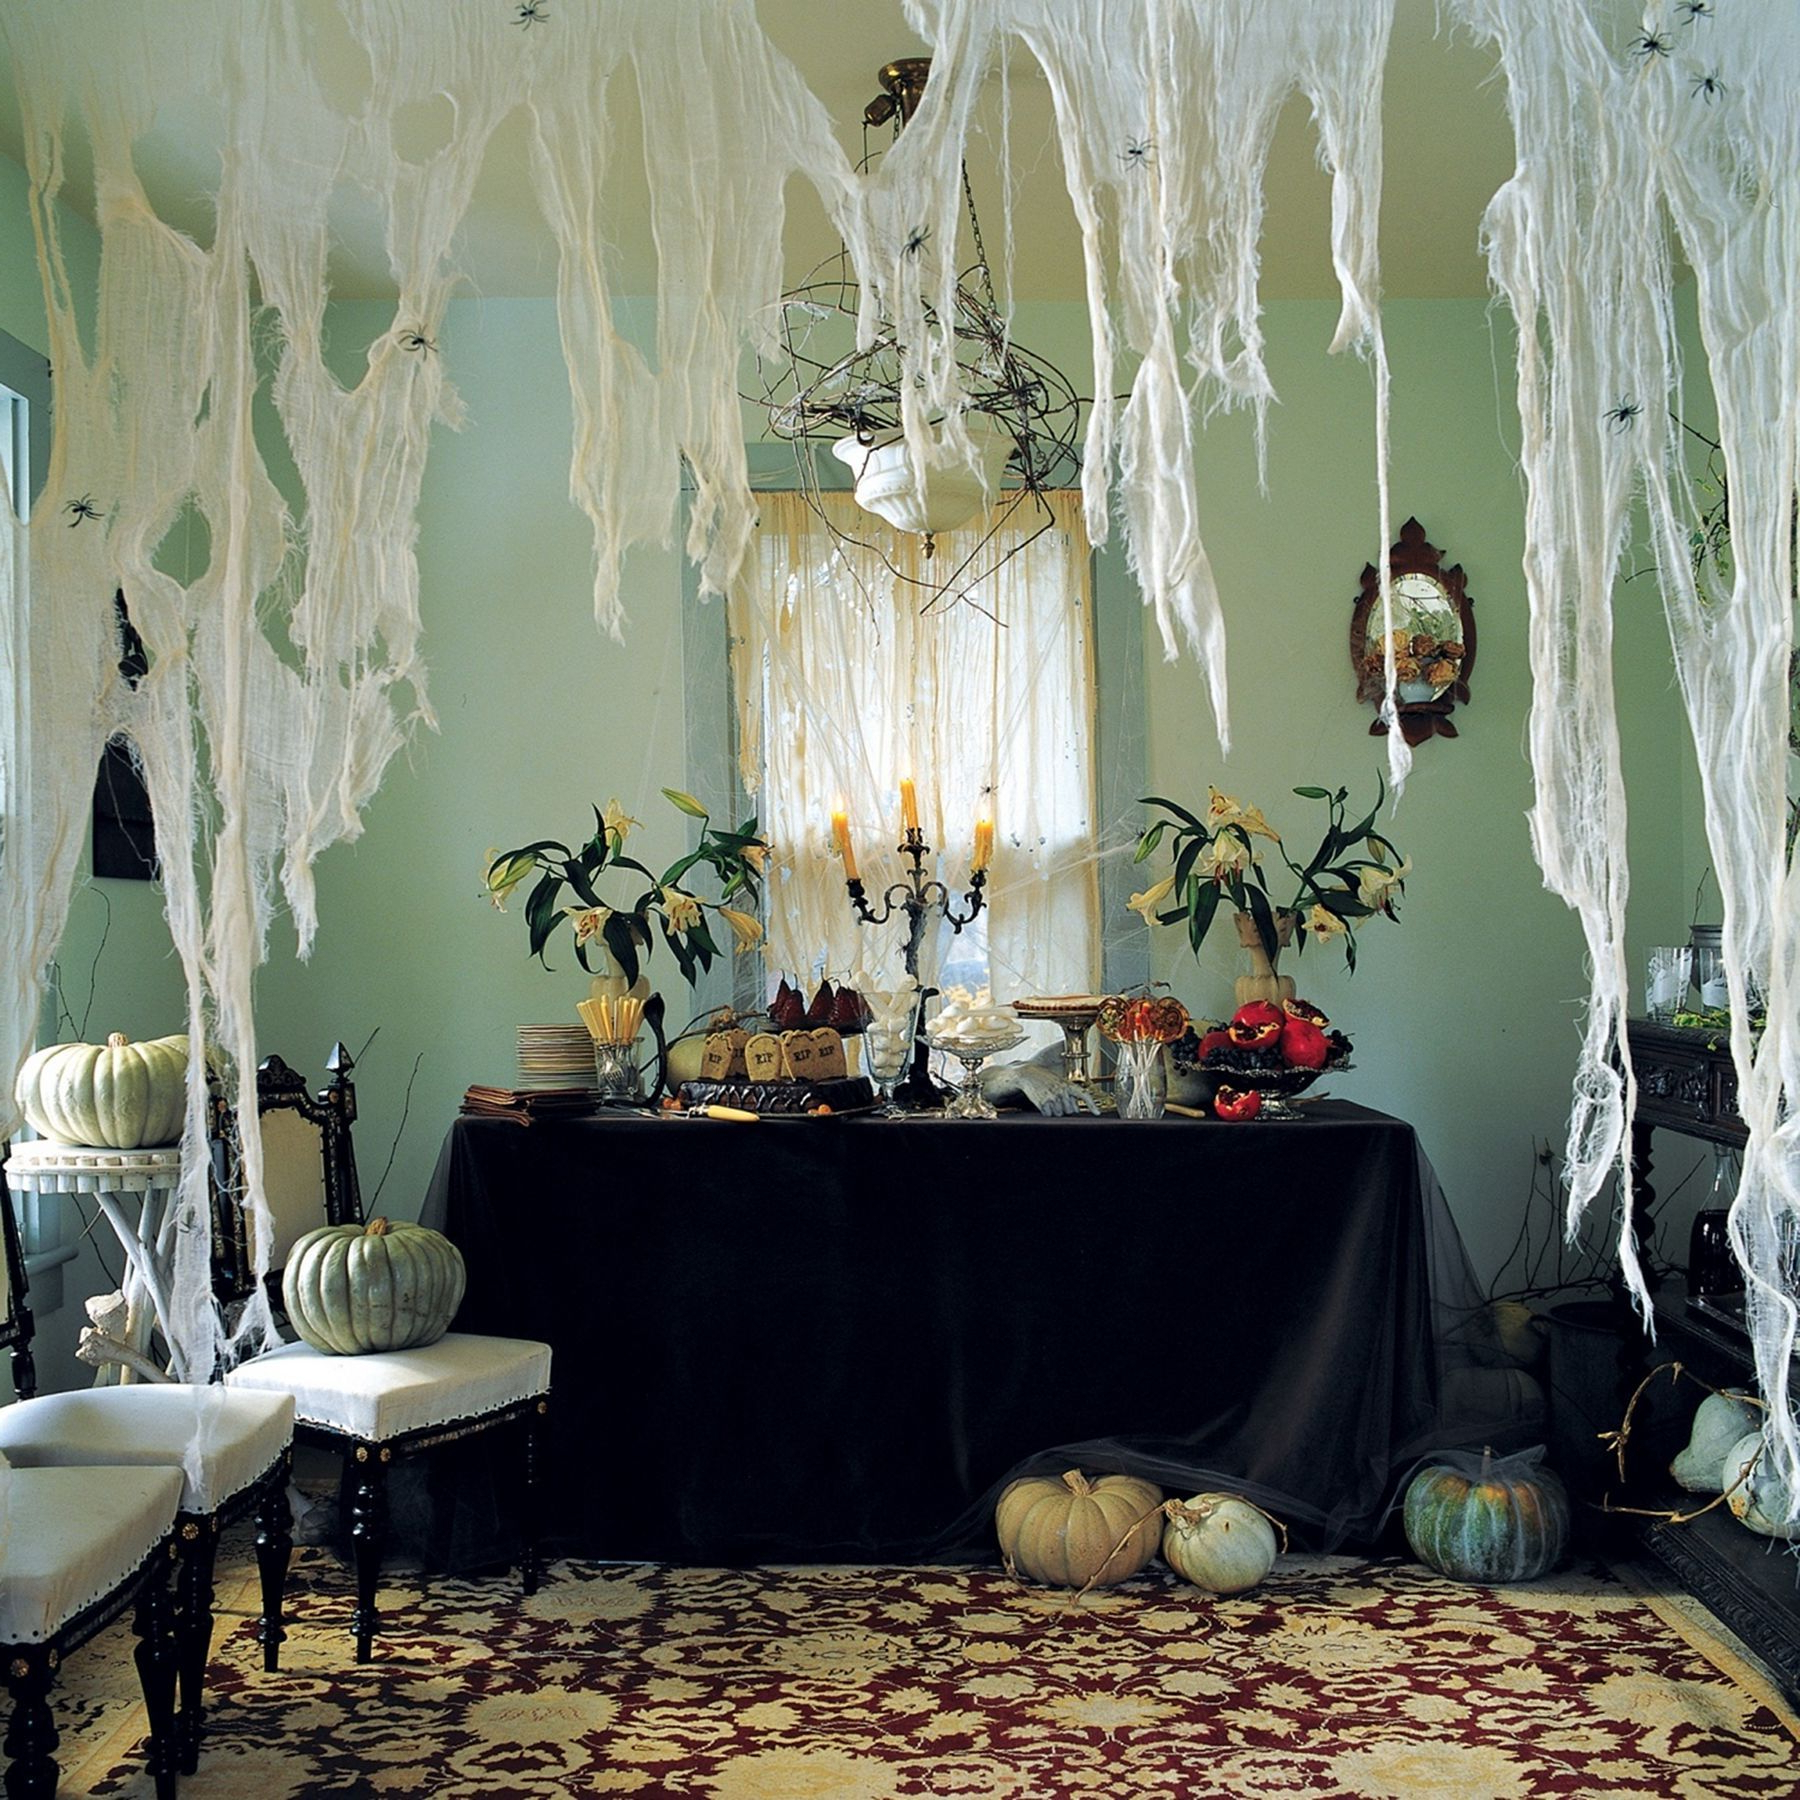 11 Marvelous Halloween Home Decor Ideas To Enliven The